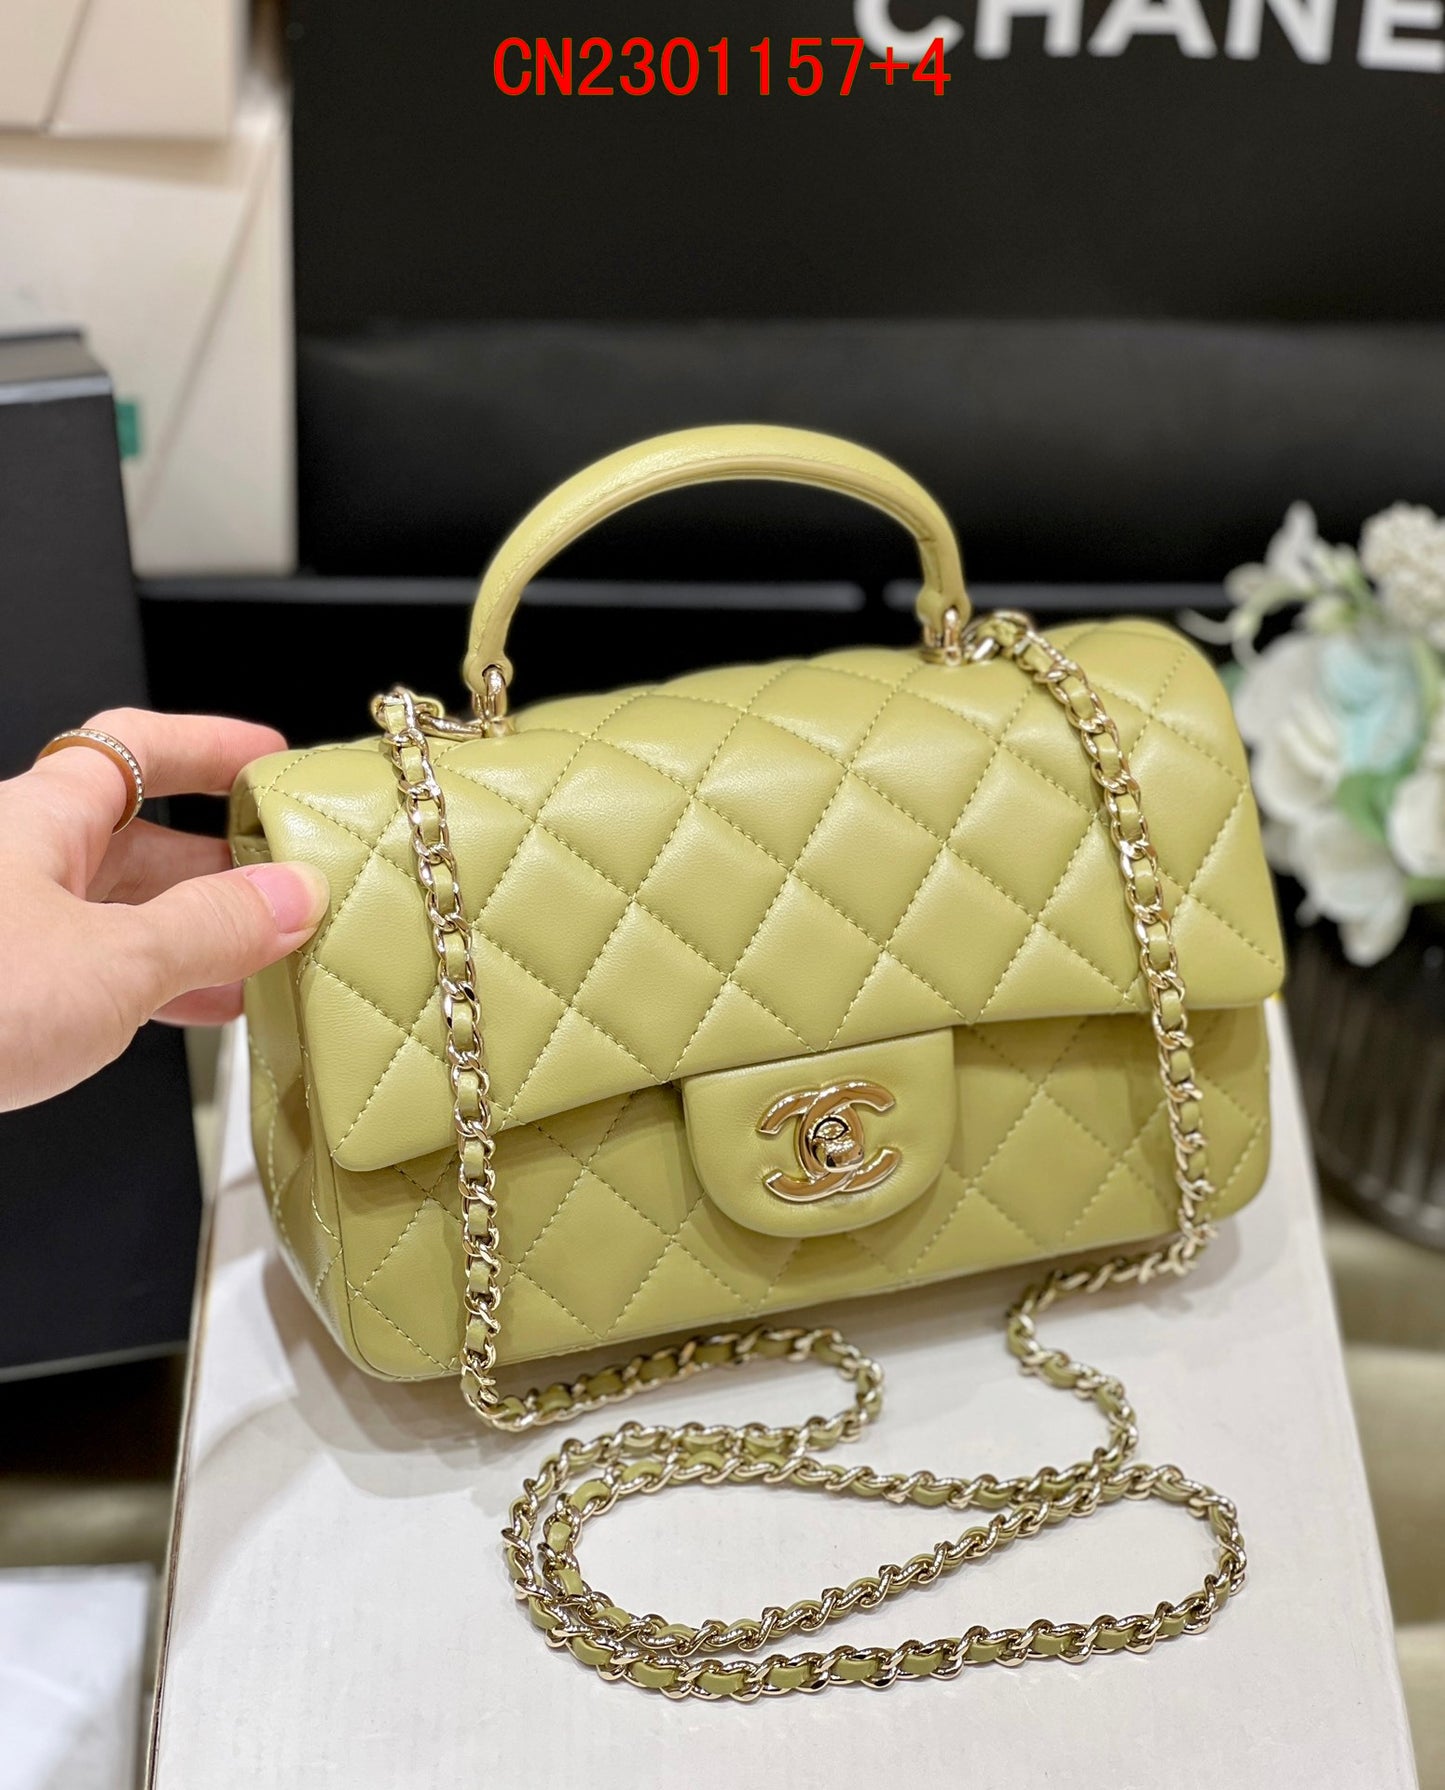 Chanel Mini Flap Bag with top handle